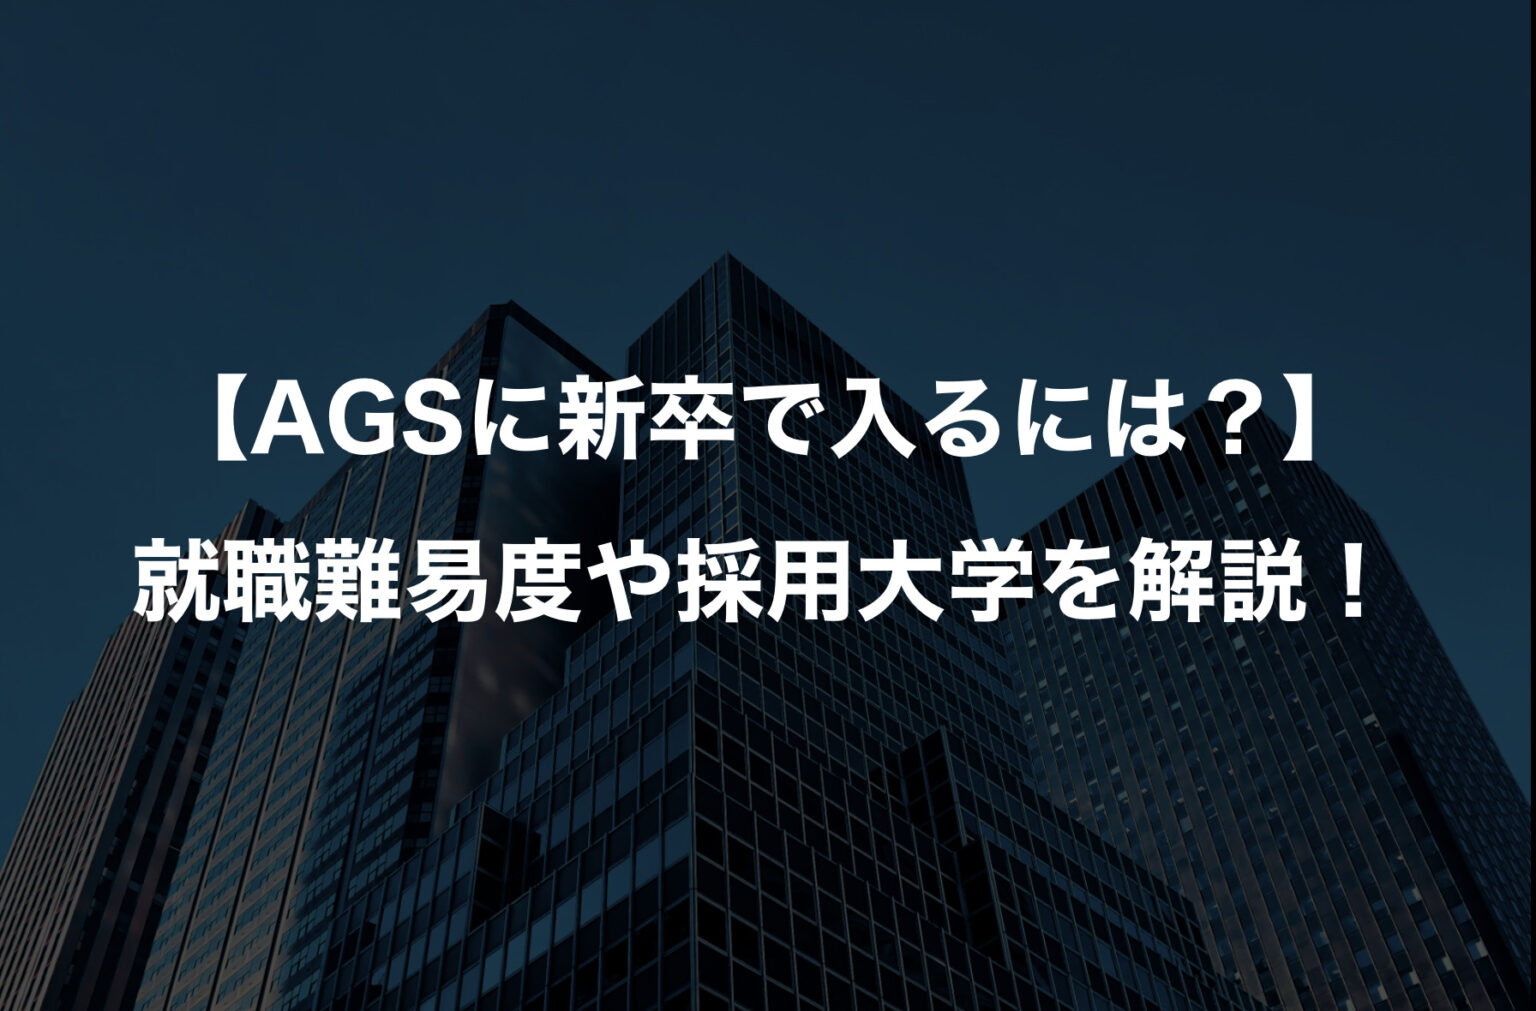 【AGSに新卒で入るには？】就職難易度や採用大学を解説！